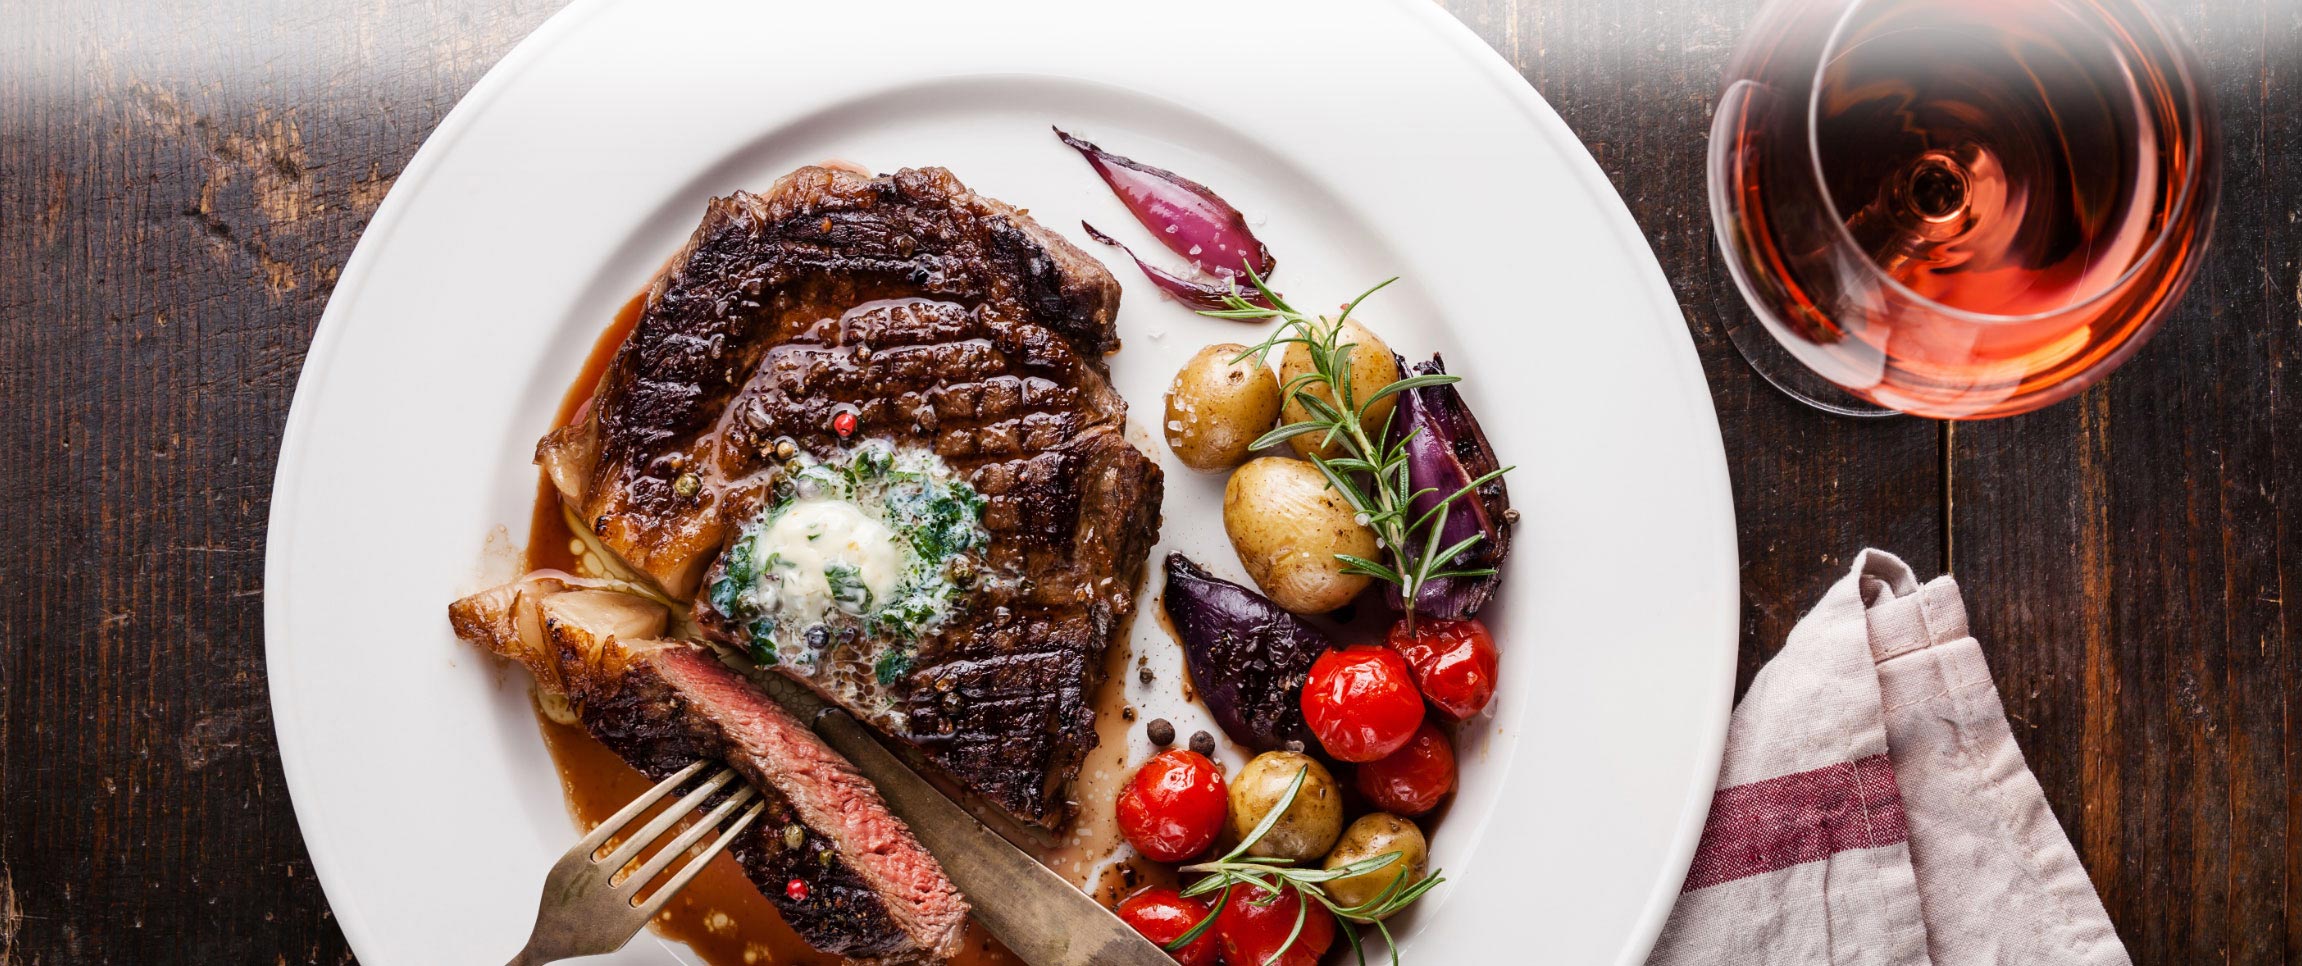 Steak and Wine Upselling Tips